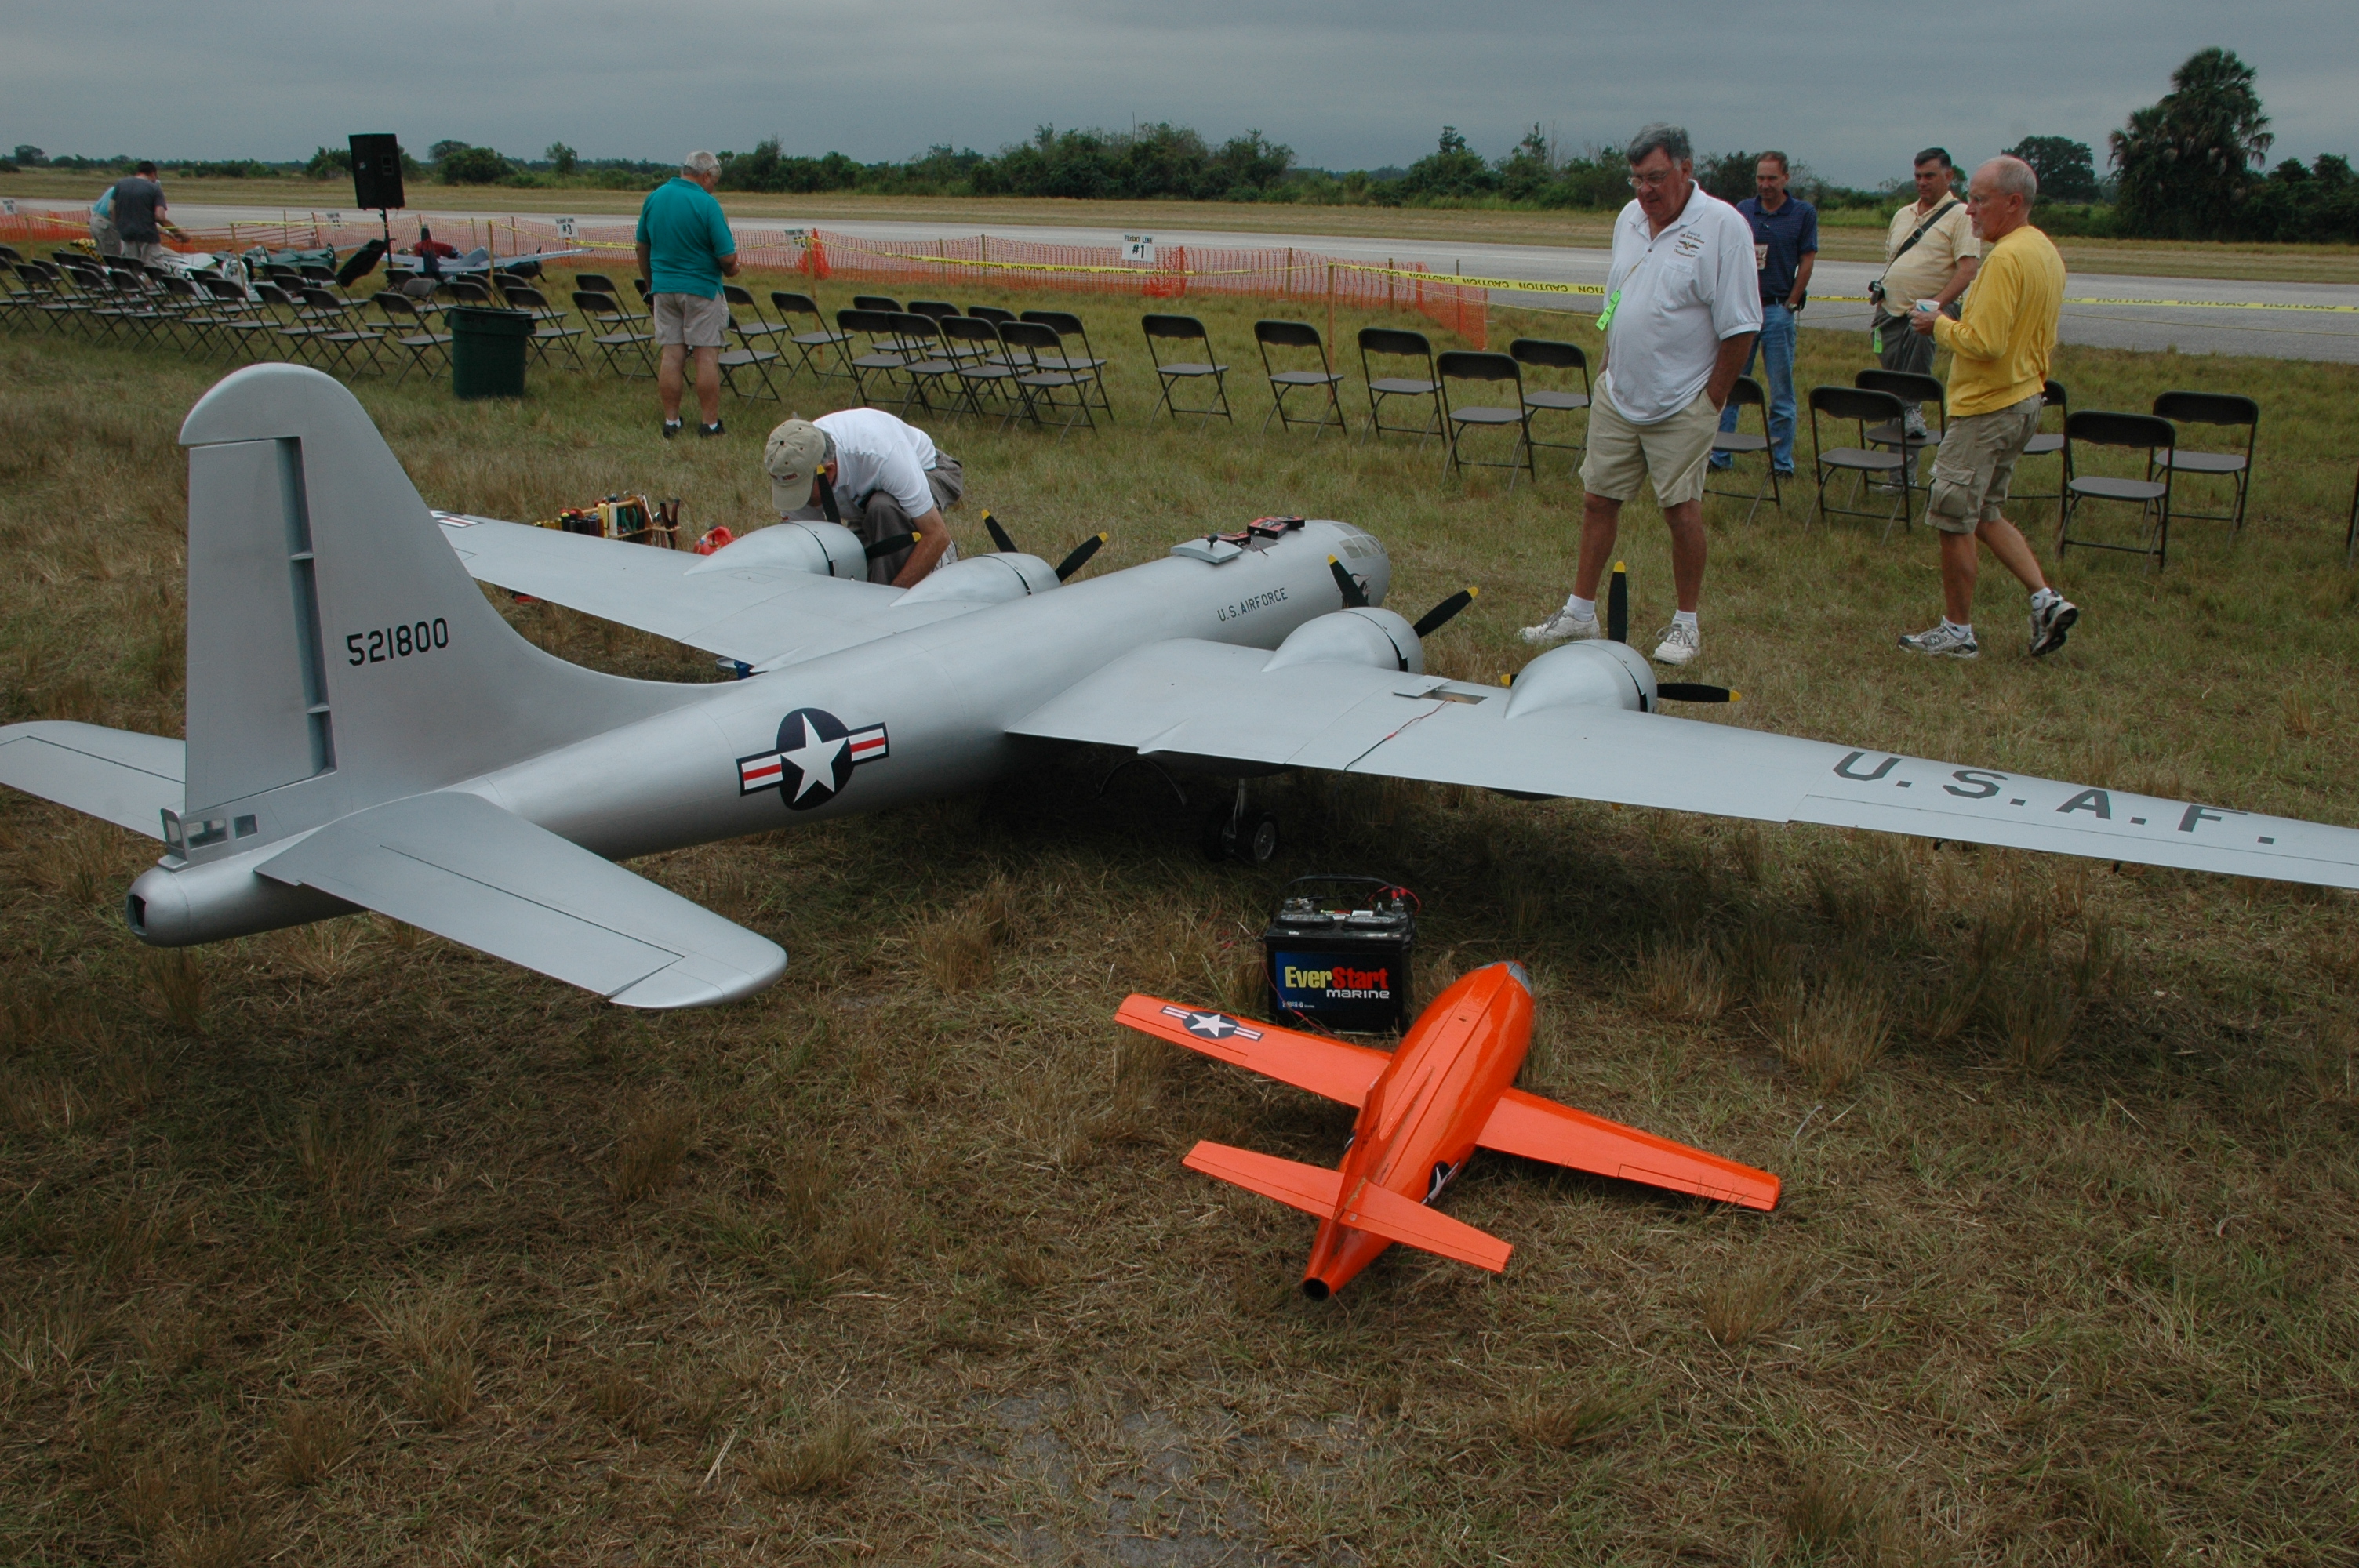 Admirers look at the large radio controlled planes on display at the Top Gun event